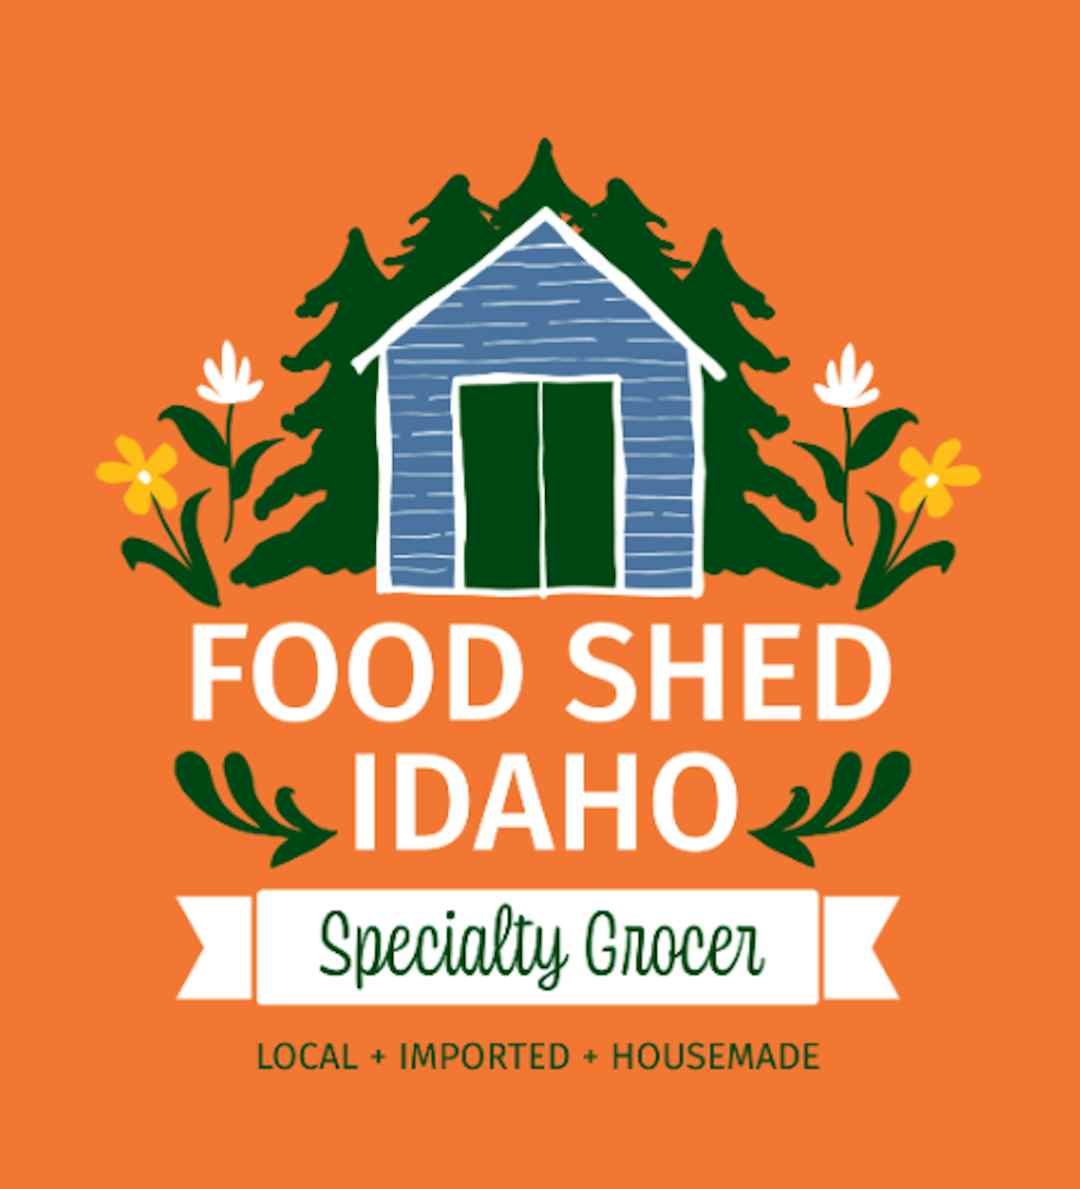 Shop local and housemade with Food Shed Idaho of Victor in the Yellowstone Teton Territory.